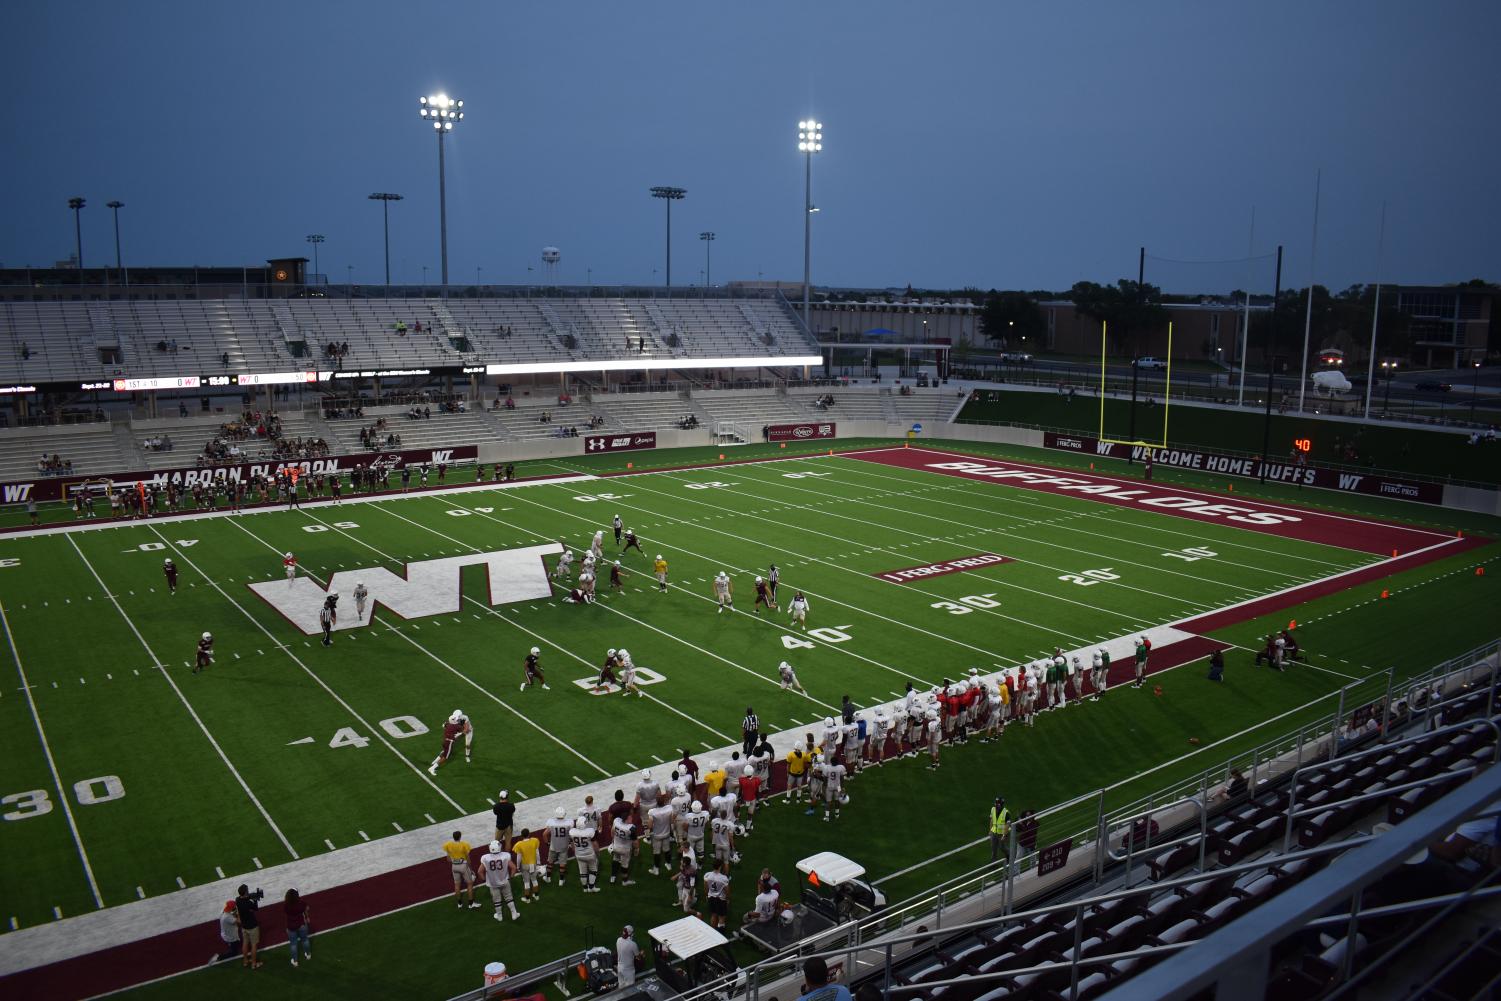 First Public WTAMU Football Outing Prepares Buffs for Upcoming Schedule - The PRAIRIE